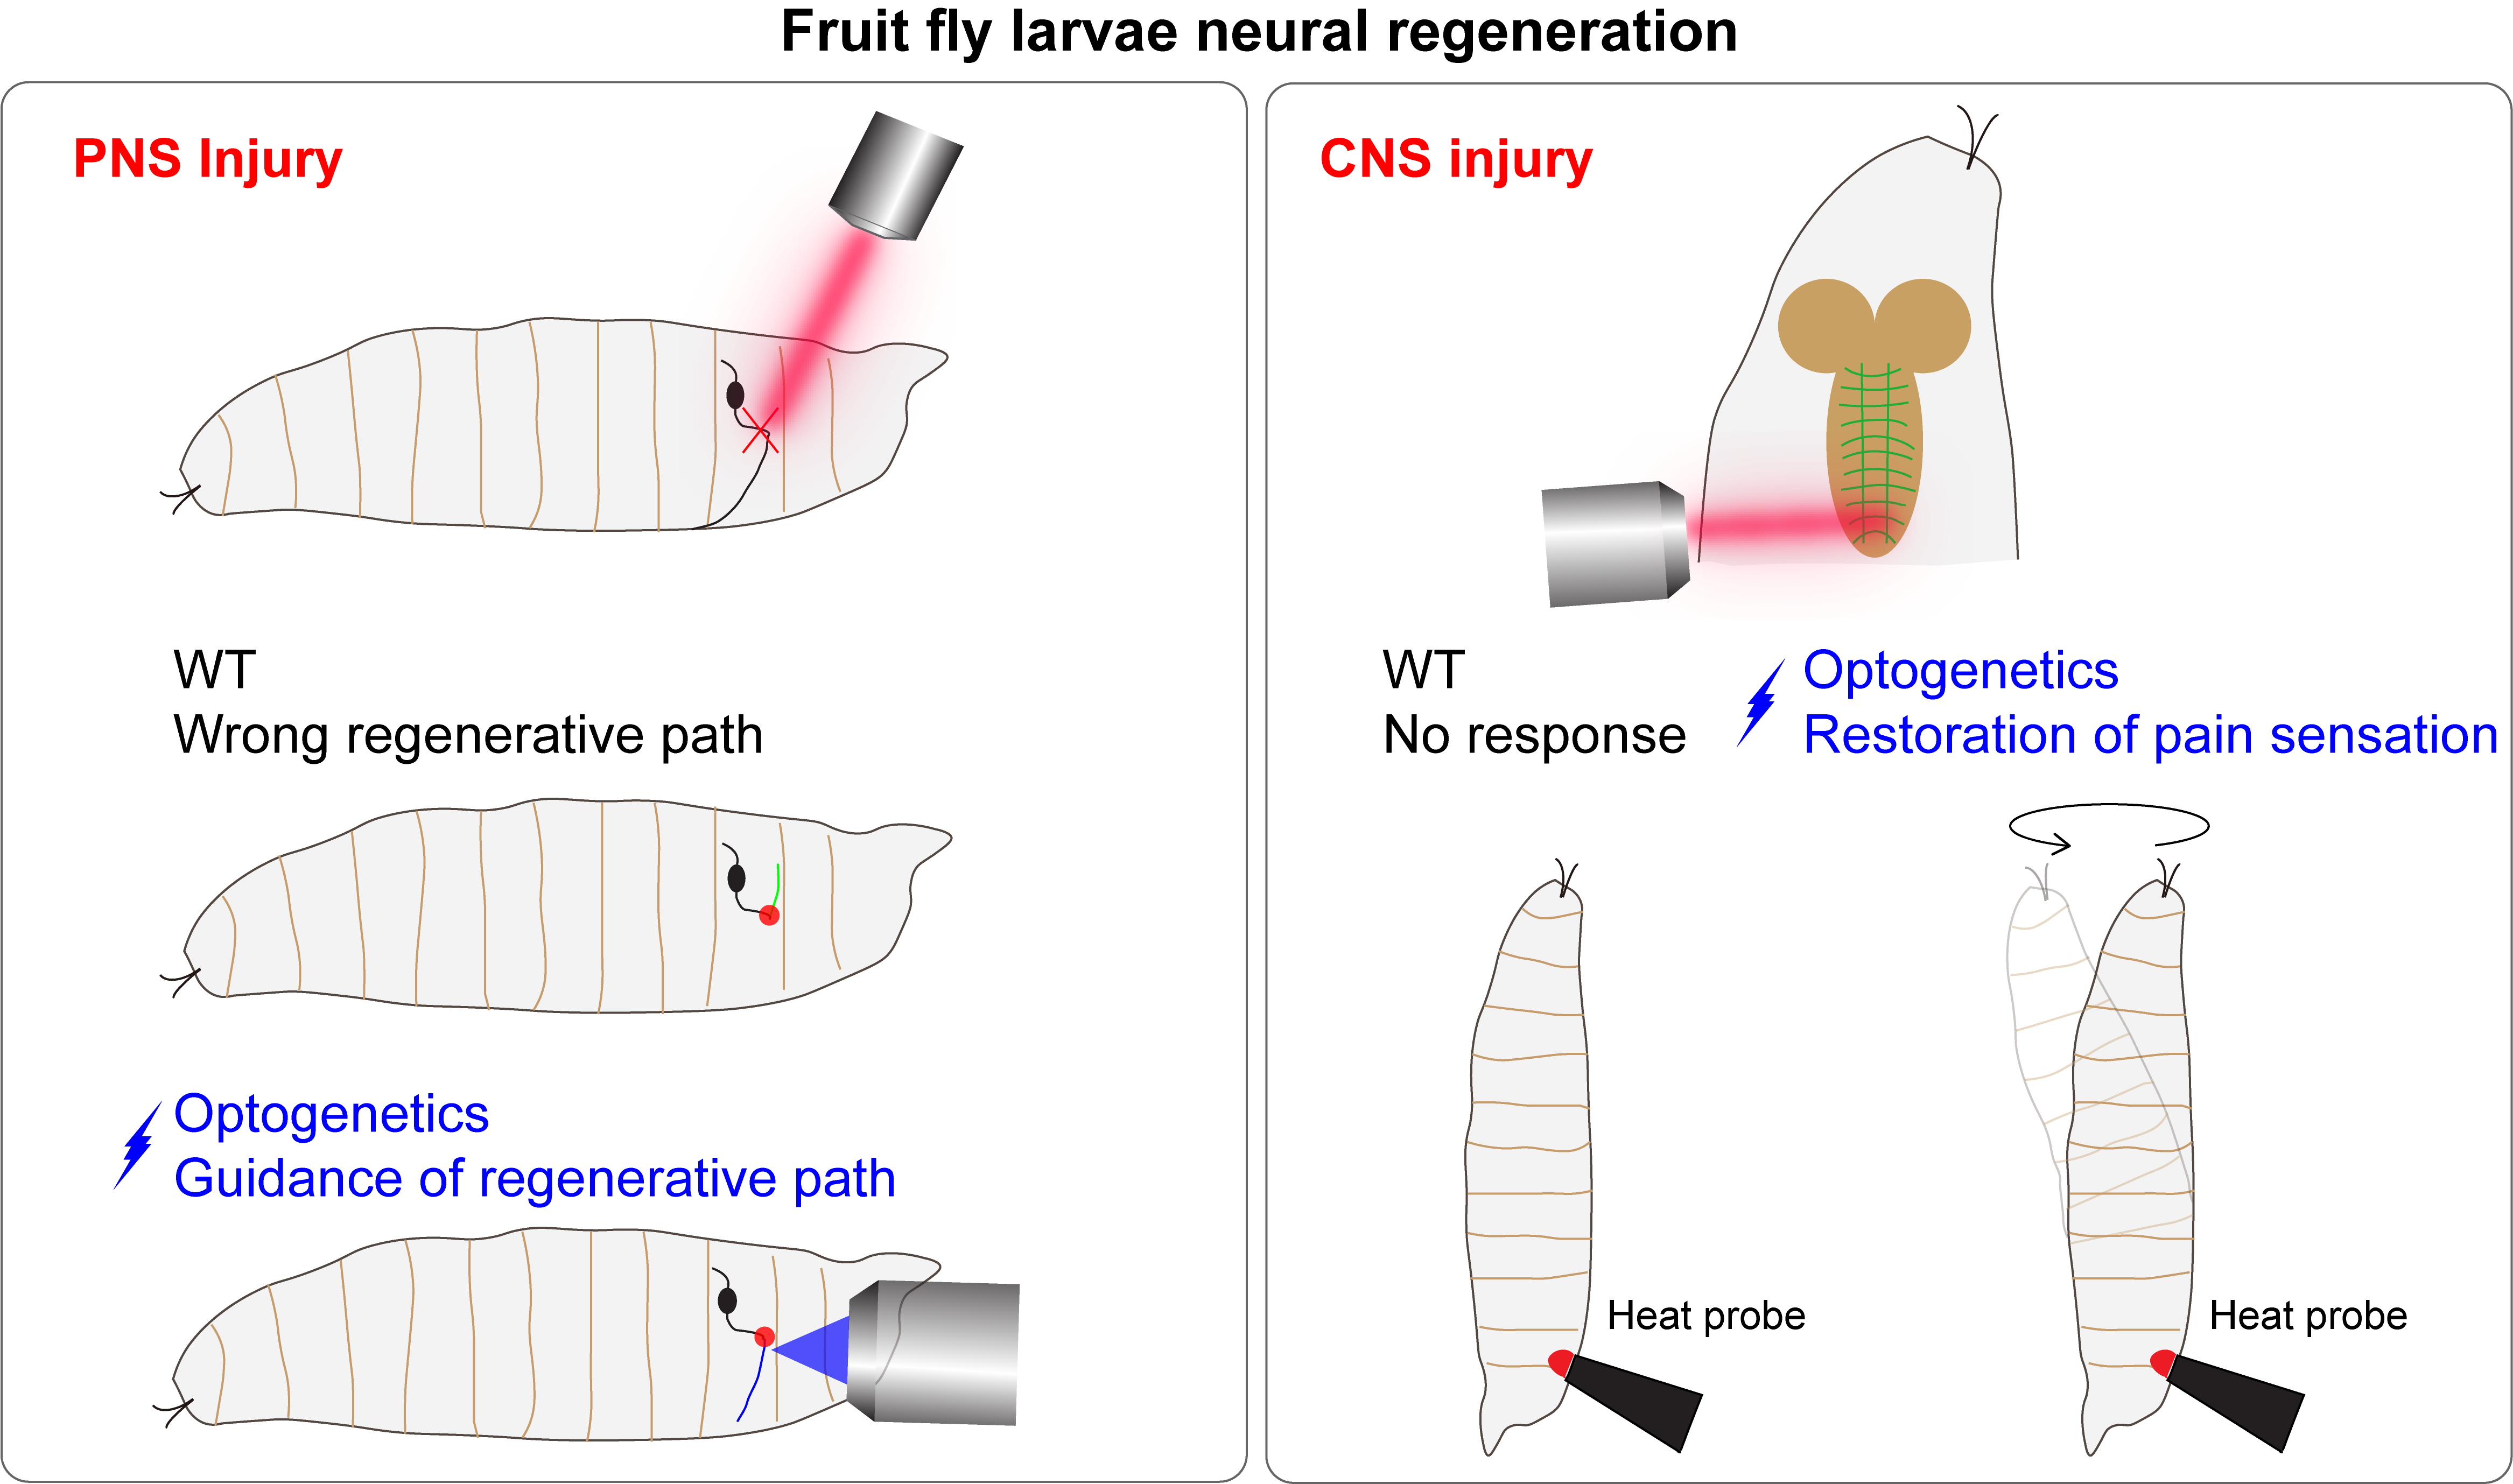 Fruit fly larvae neural regeneration charts depicting differences between PNS and CNS injuries.